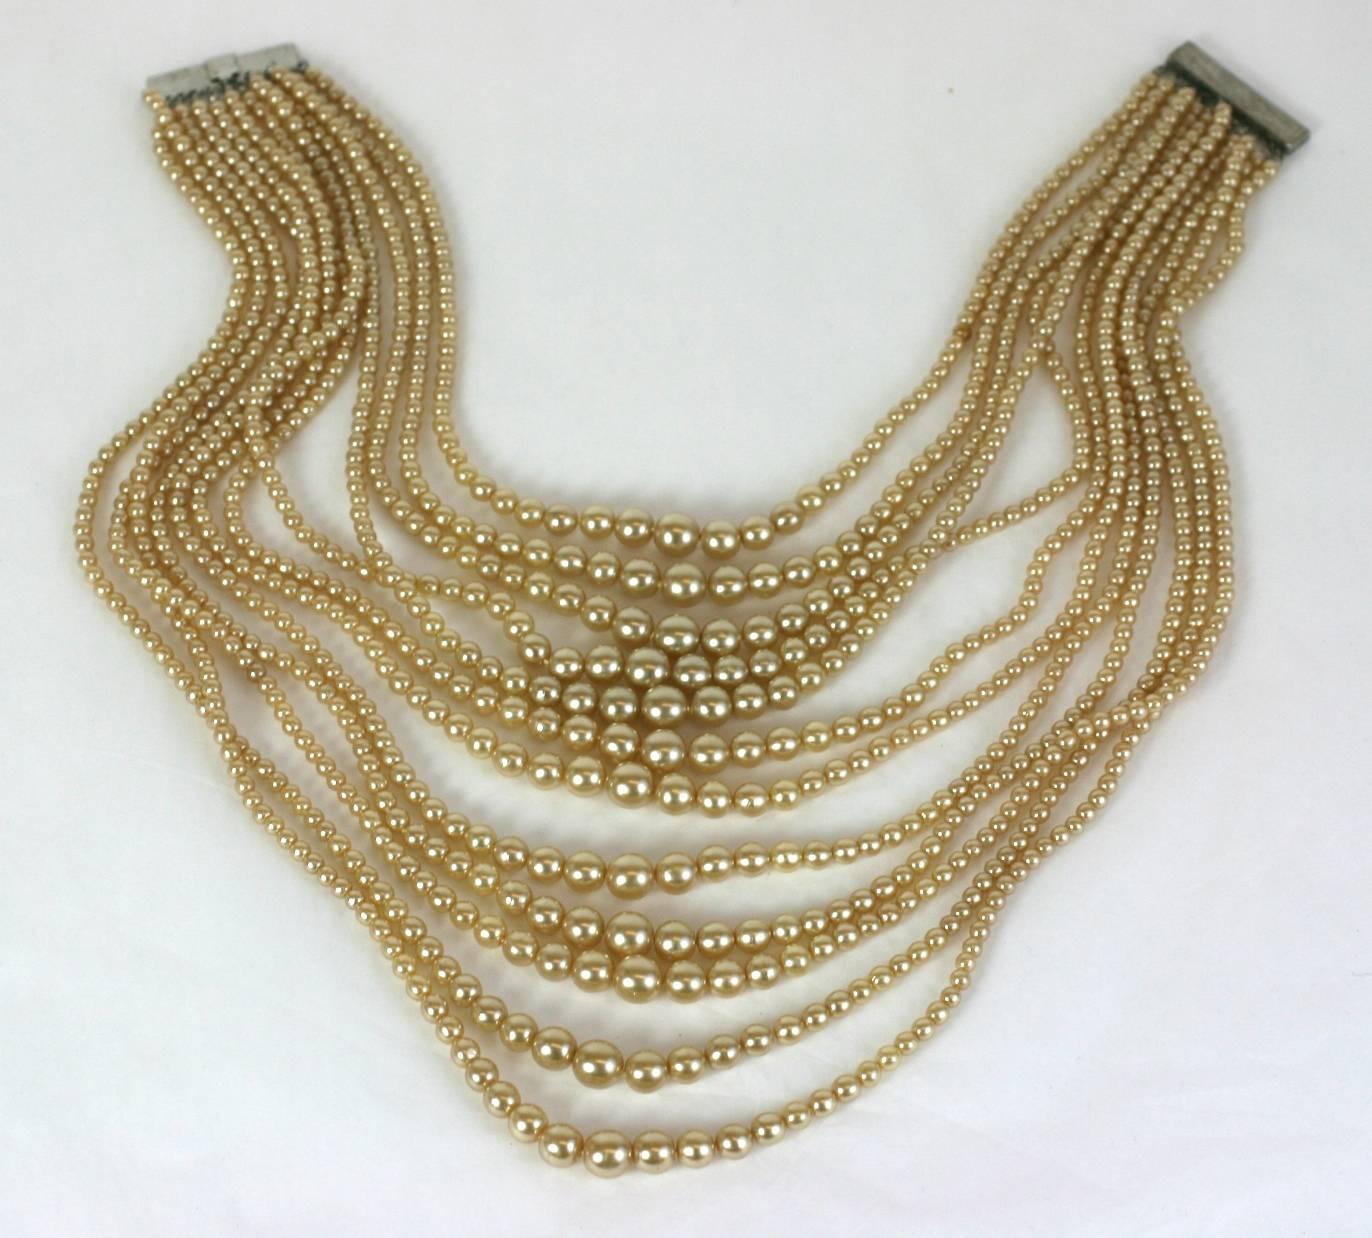 Glamorous multi strand faux pearl graduated necklace from the 1950's. Pearl strands start close to neck and drape dramatically below. Perfect for the open  and strapless necklines of the period. 1950's USA. 13